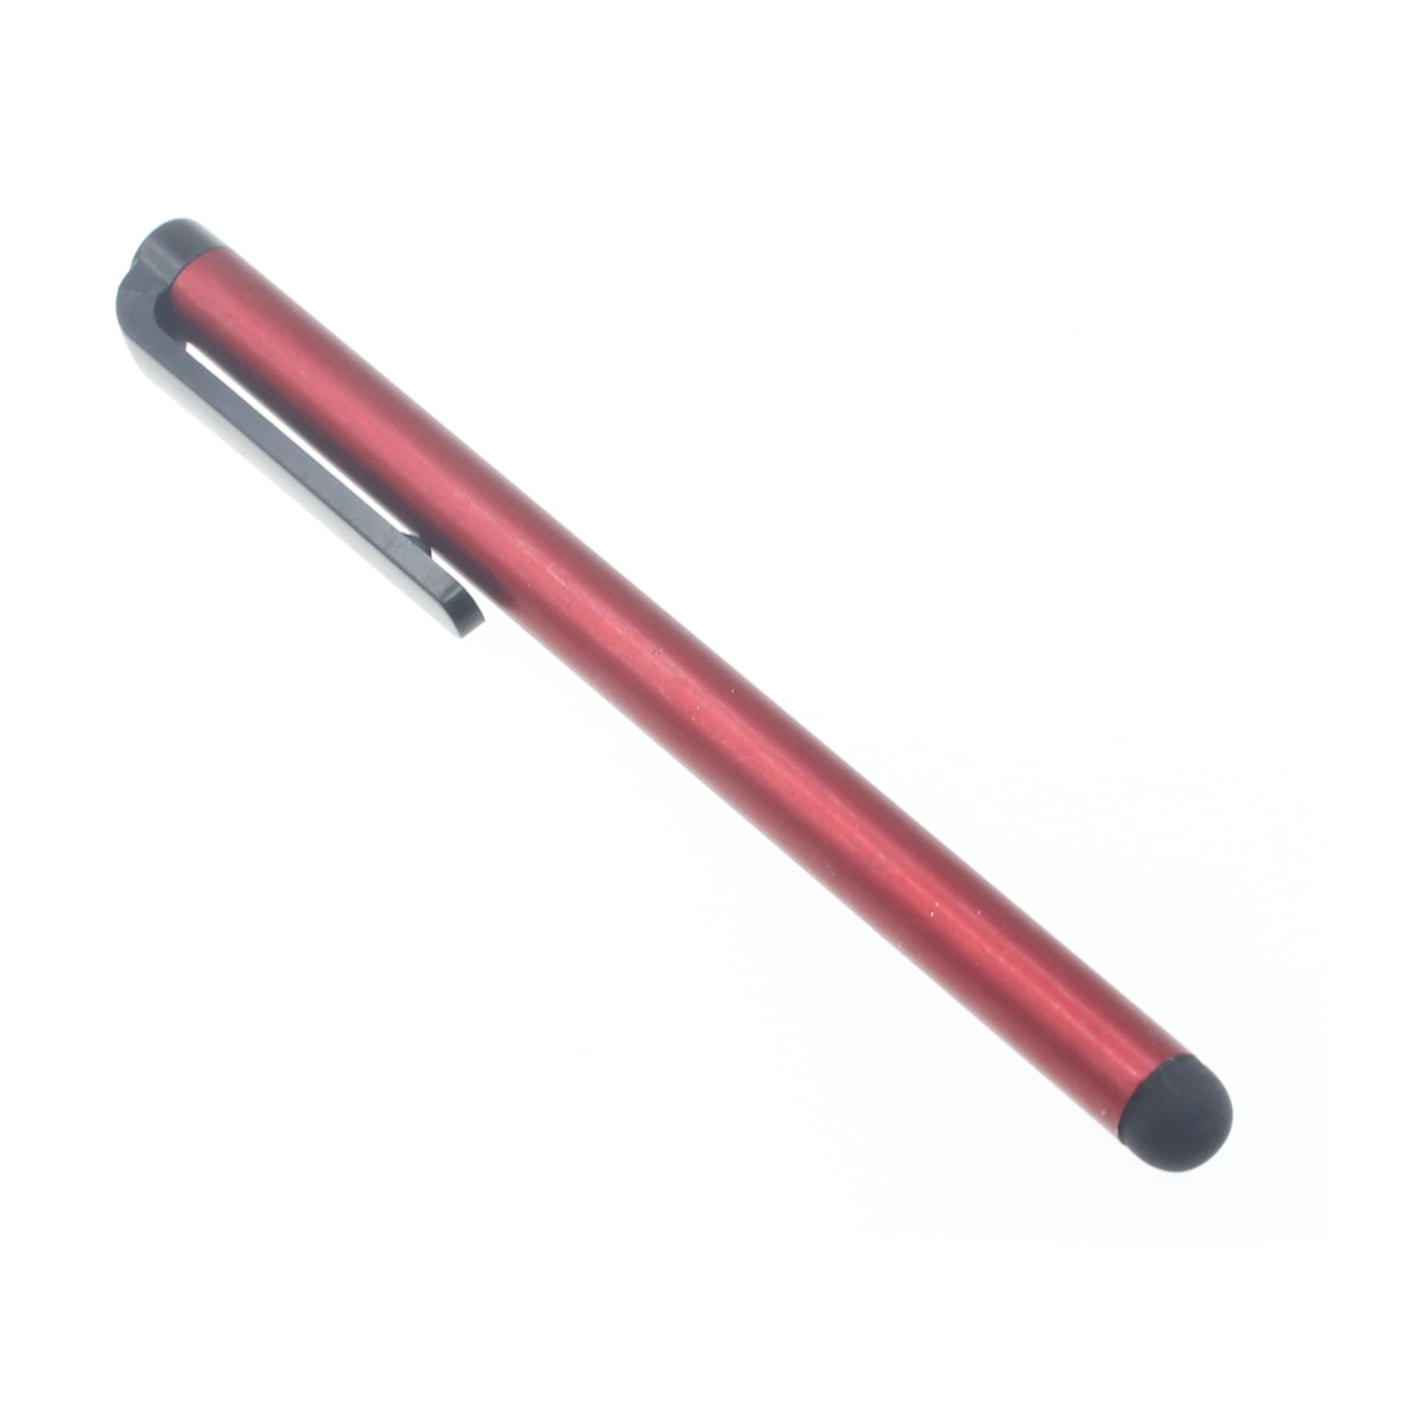 Tek Styz PRO Stylus 3 Pack-RED Pen Works for Asus ZenPad 10 16GB with Custom High Sensitivity Touch and Black Ink! 